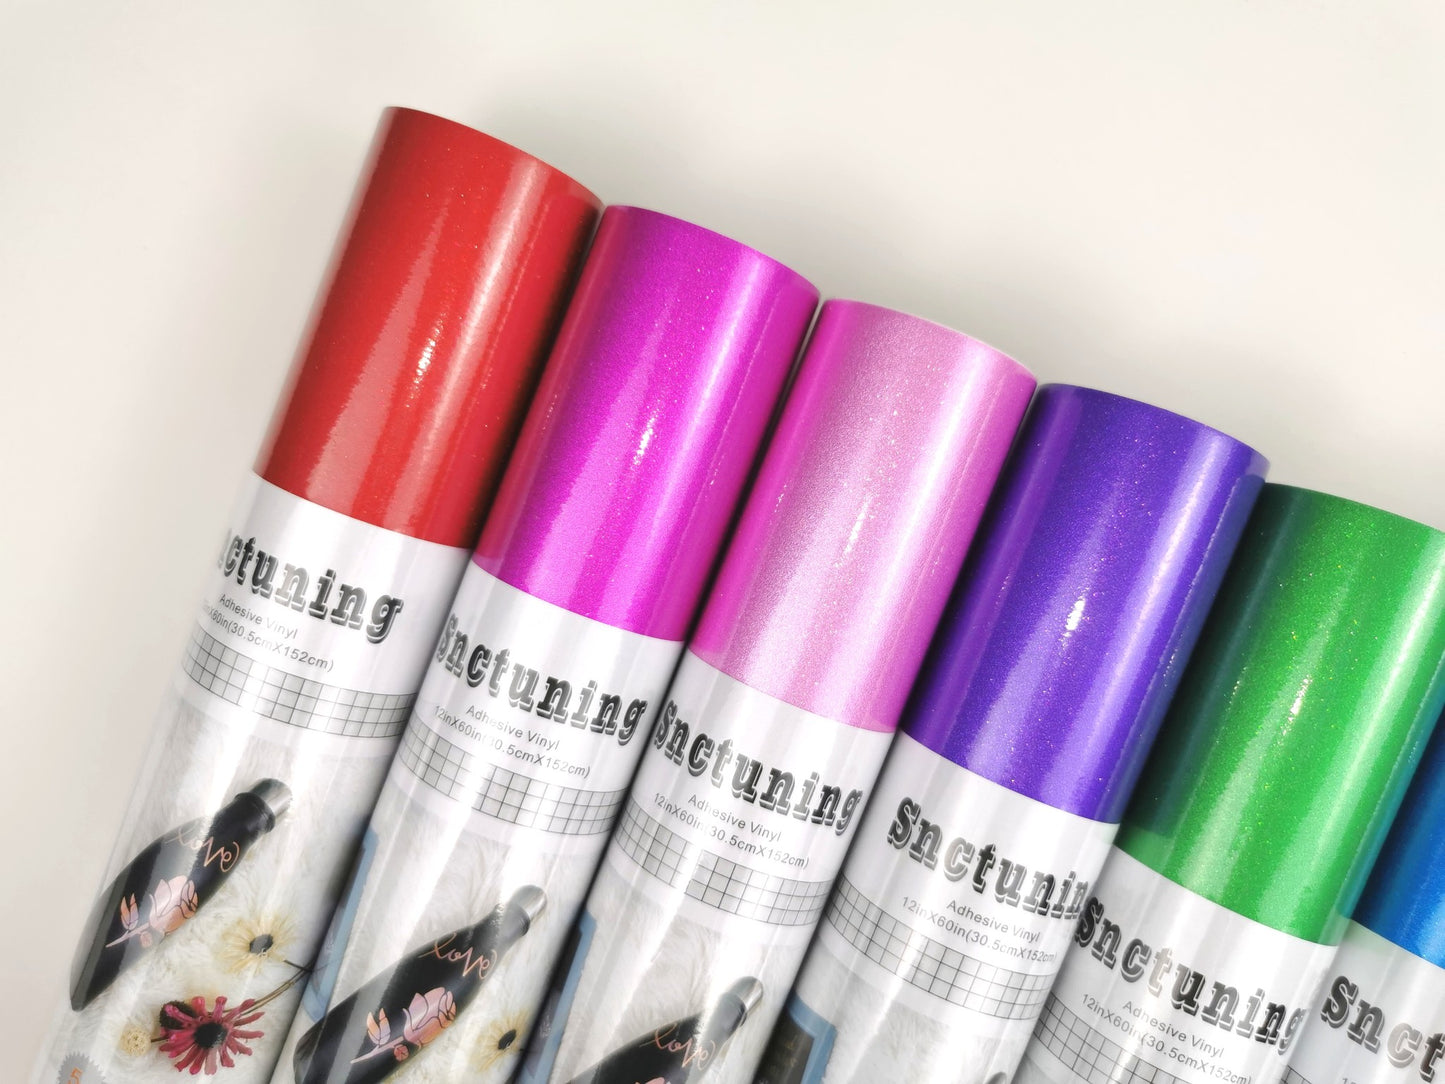 SNC 1ftx5ft Quality Vinyl Sticker Adhesive Roll Shimmer CHOOSE FROM 10 COLORS